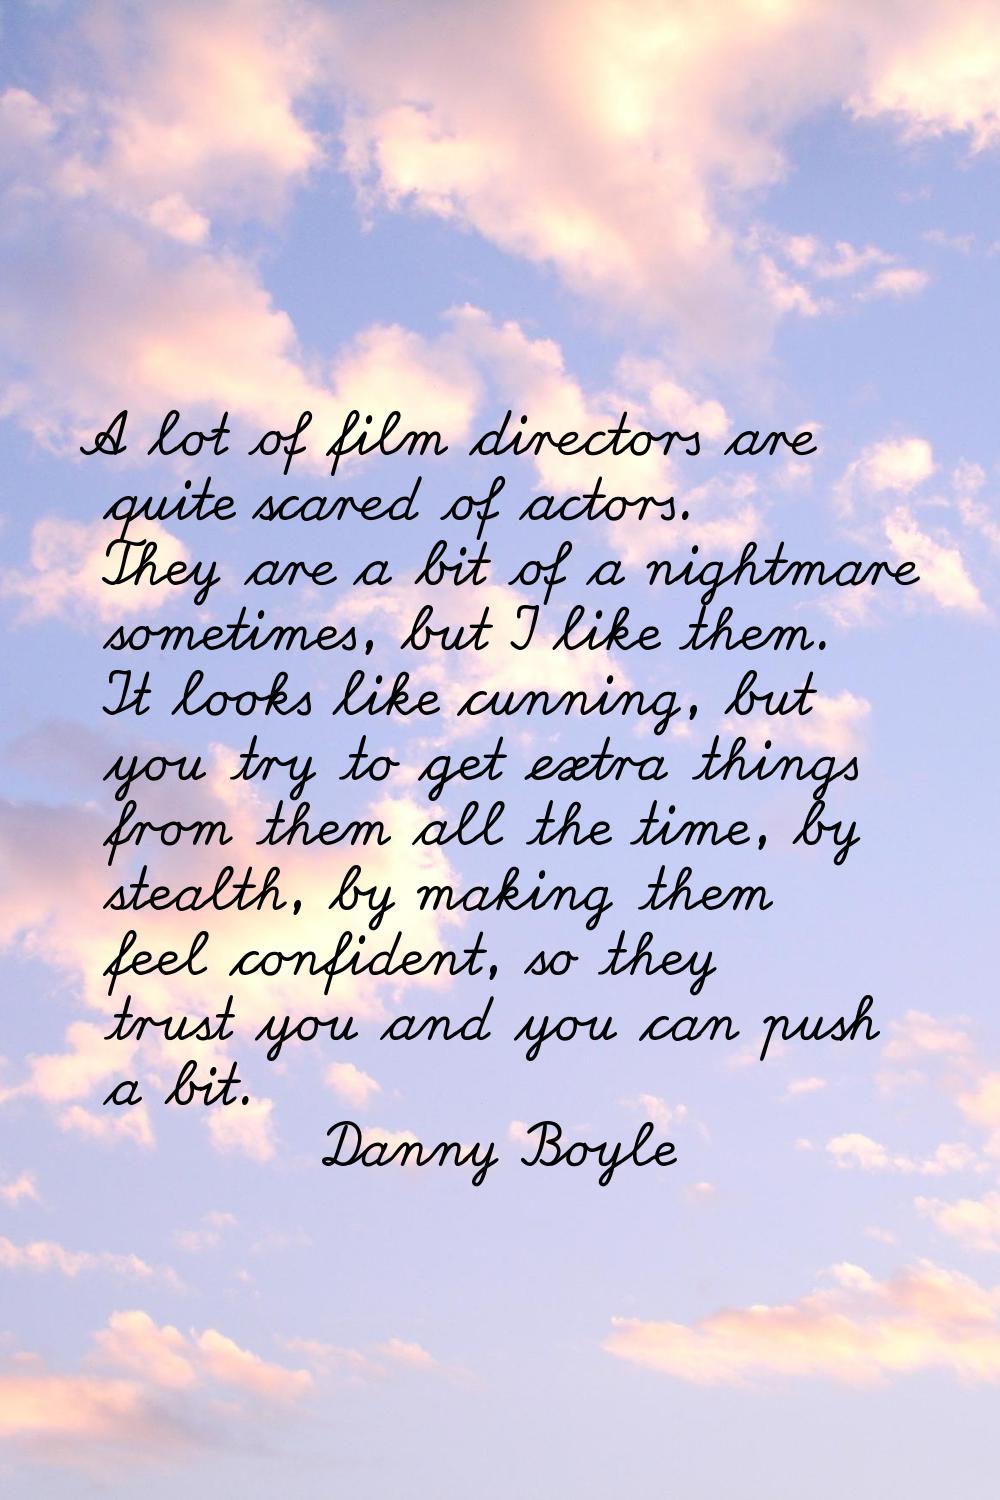 A lot of film directors are quite scared of actors. They are a bit of a nightmare sometimes, but I 